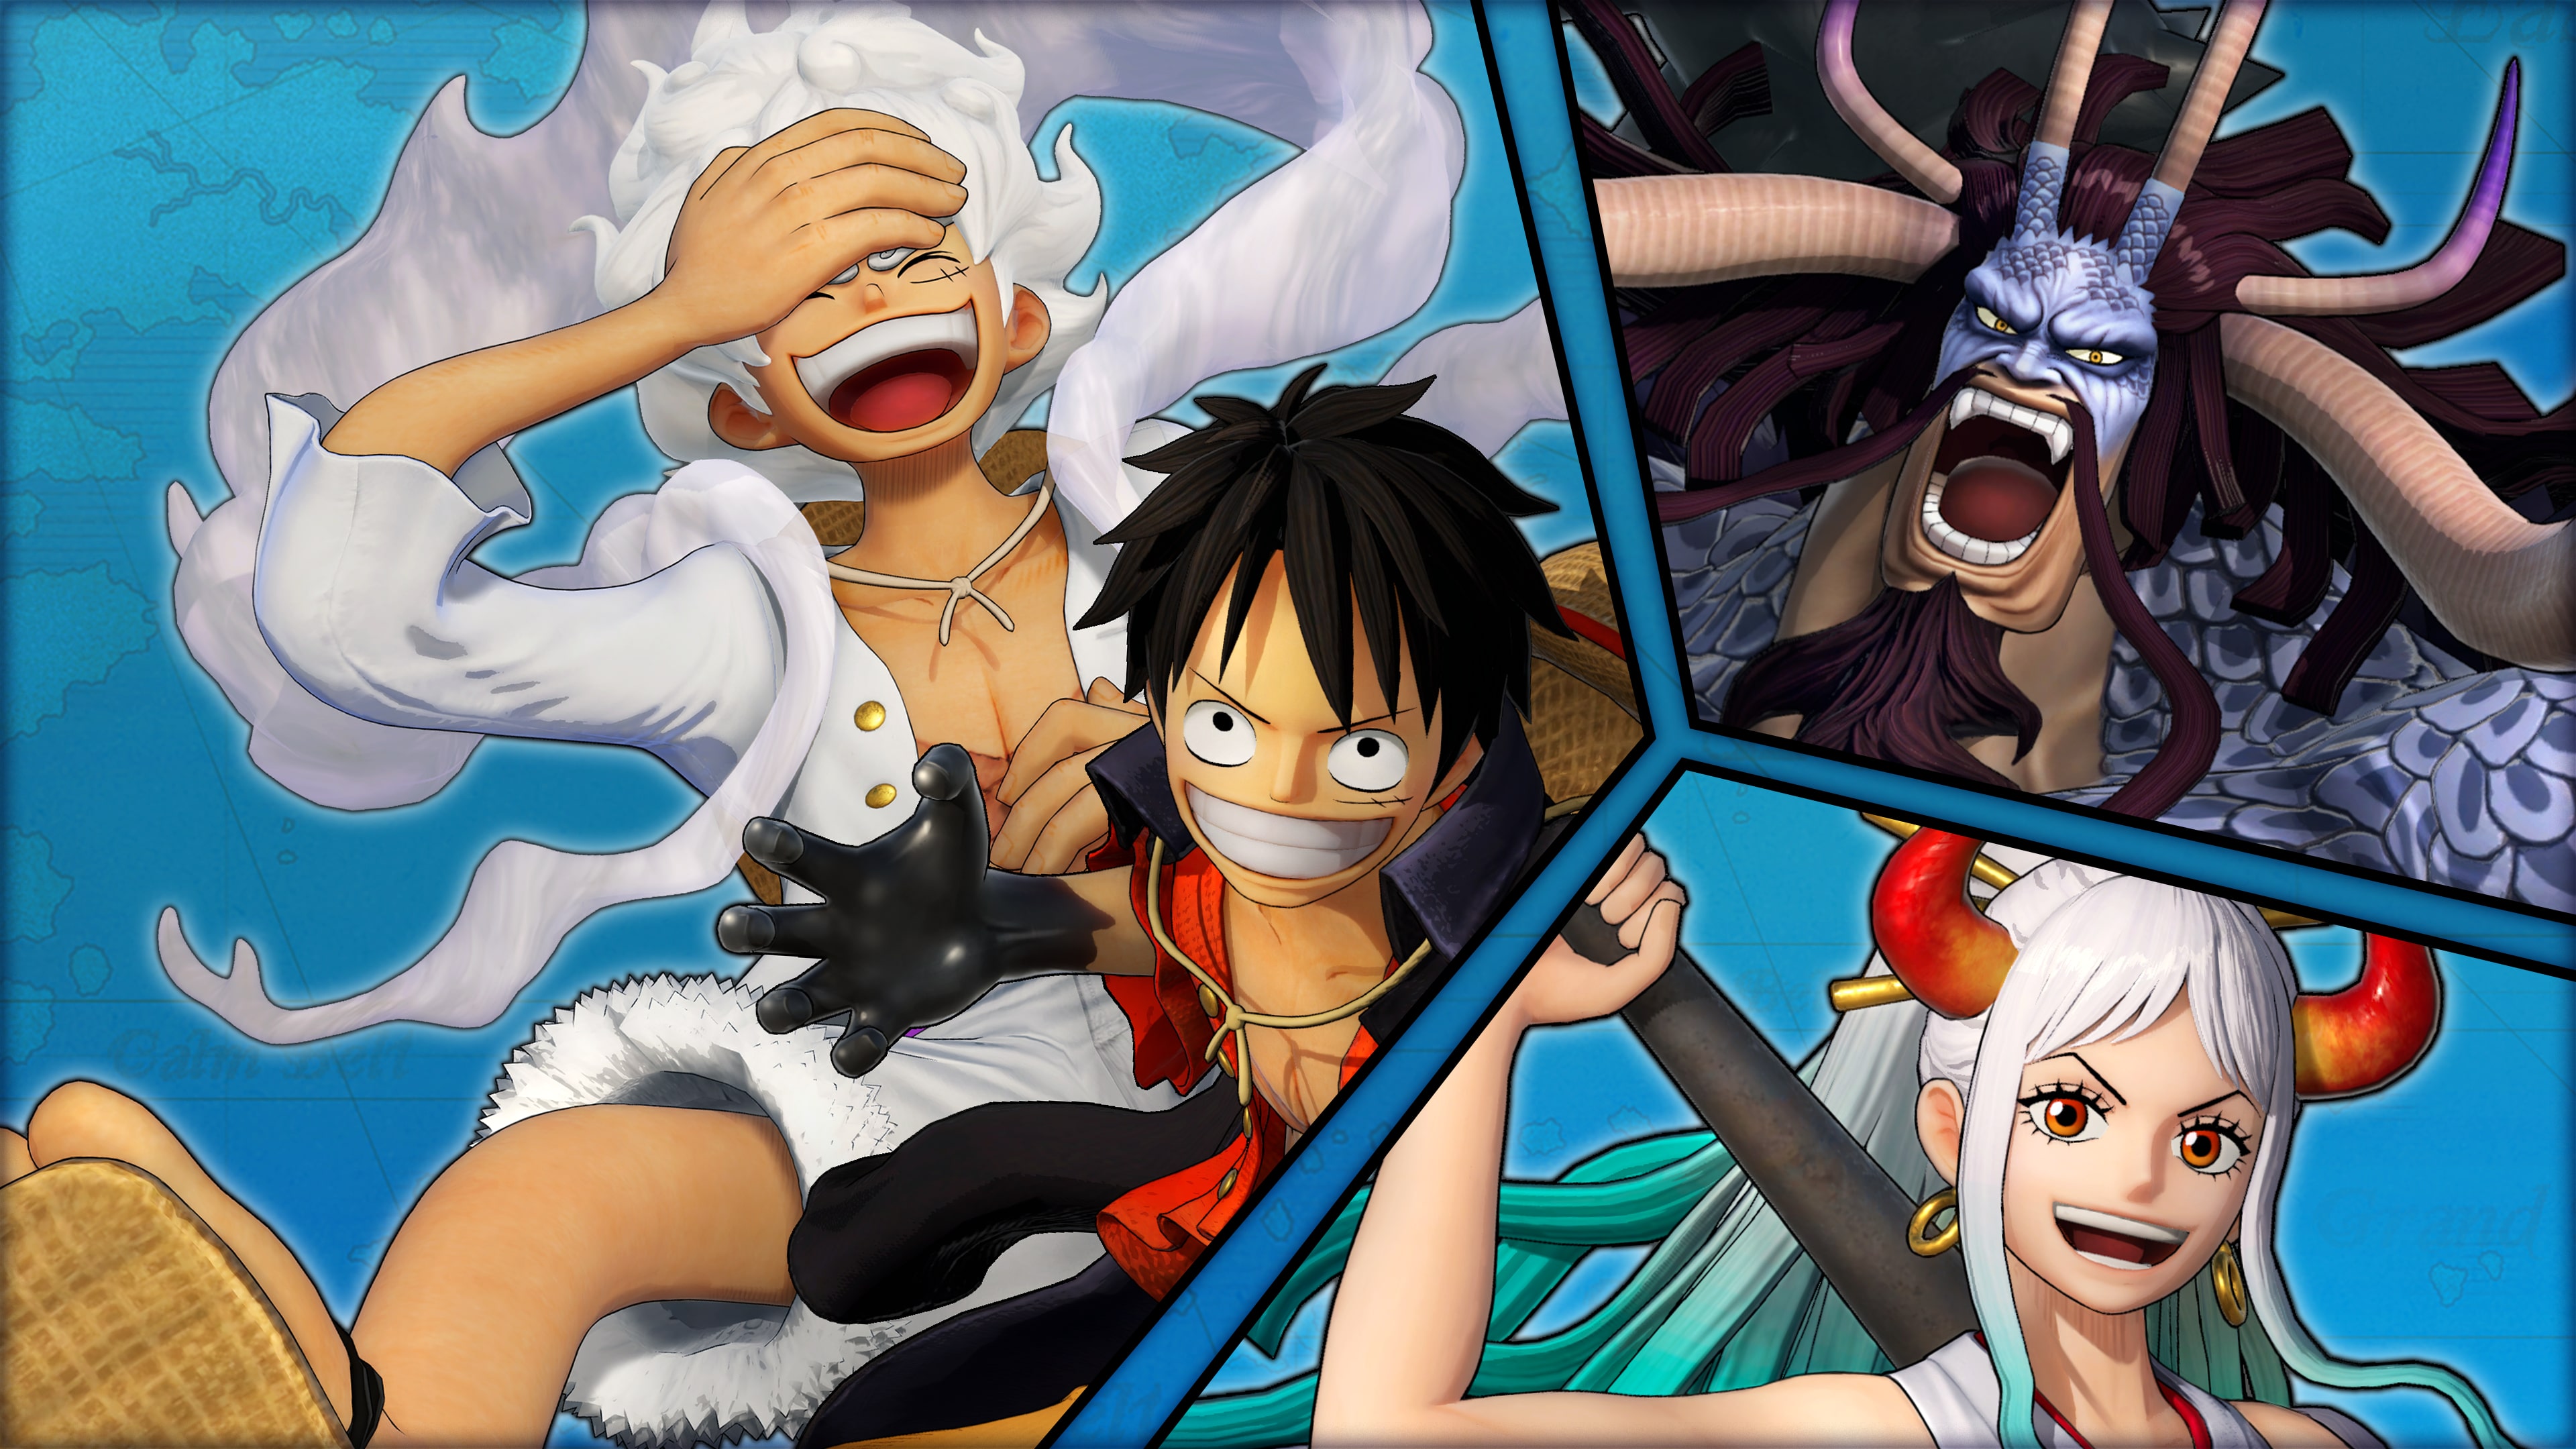 ONE PIECE: PIRATE WARRIORS 4 The Battle of Onigashima Pack